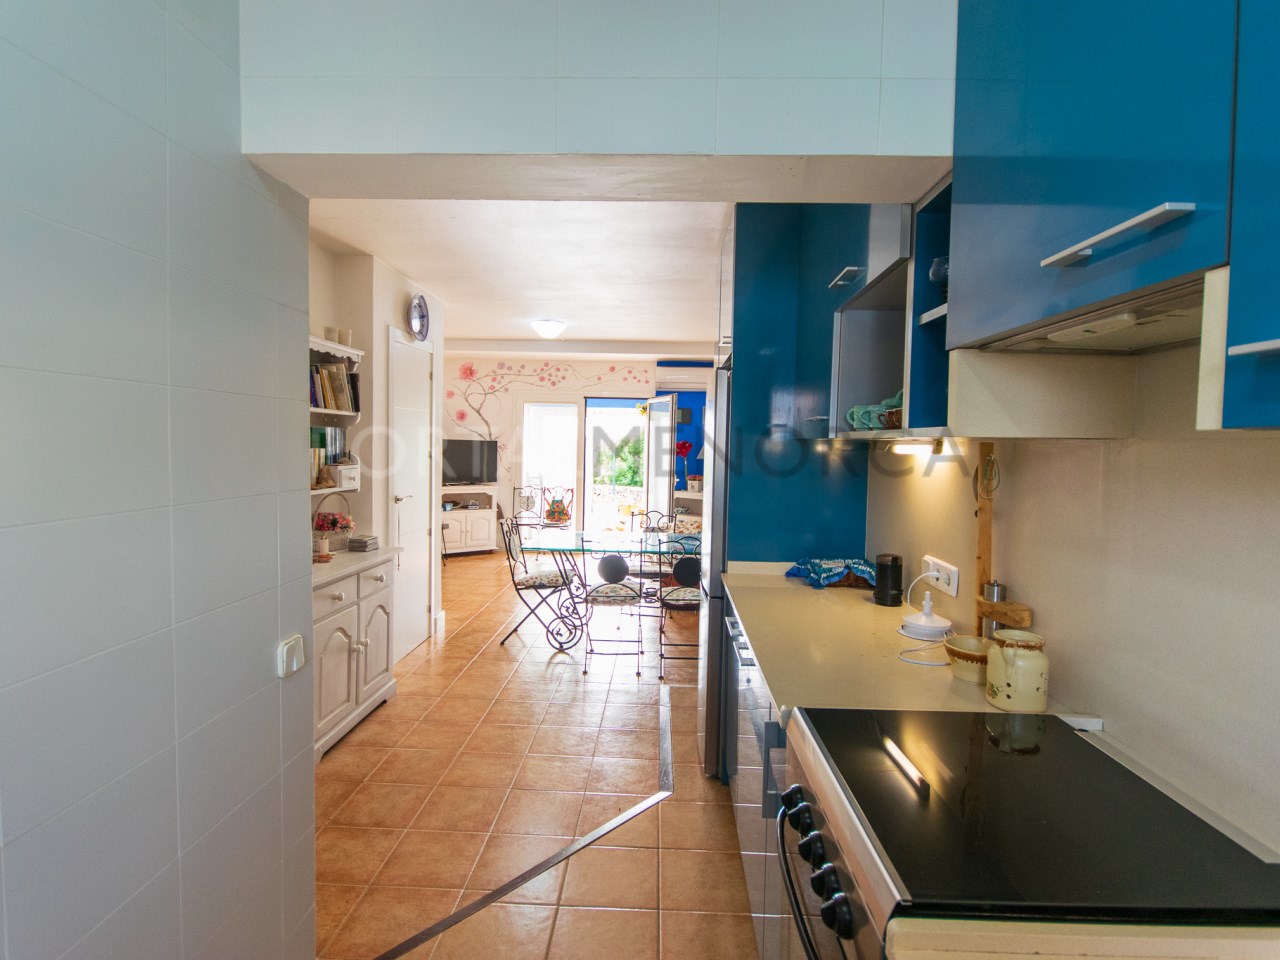 Kitchen of two bedroom townhouse for sale in Cales Coves